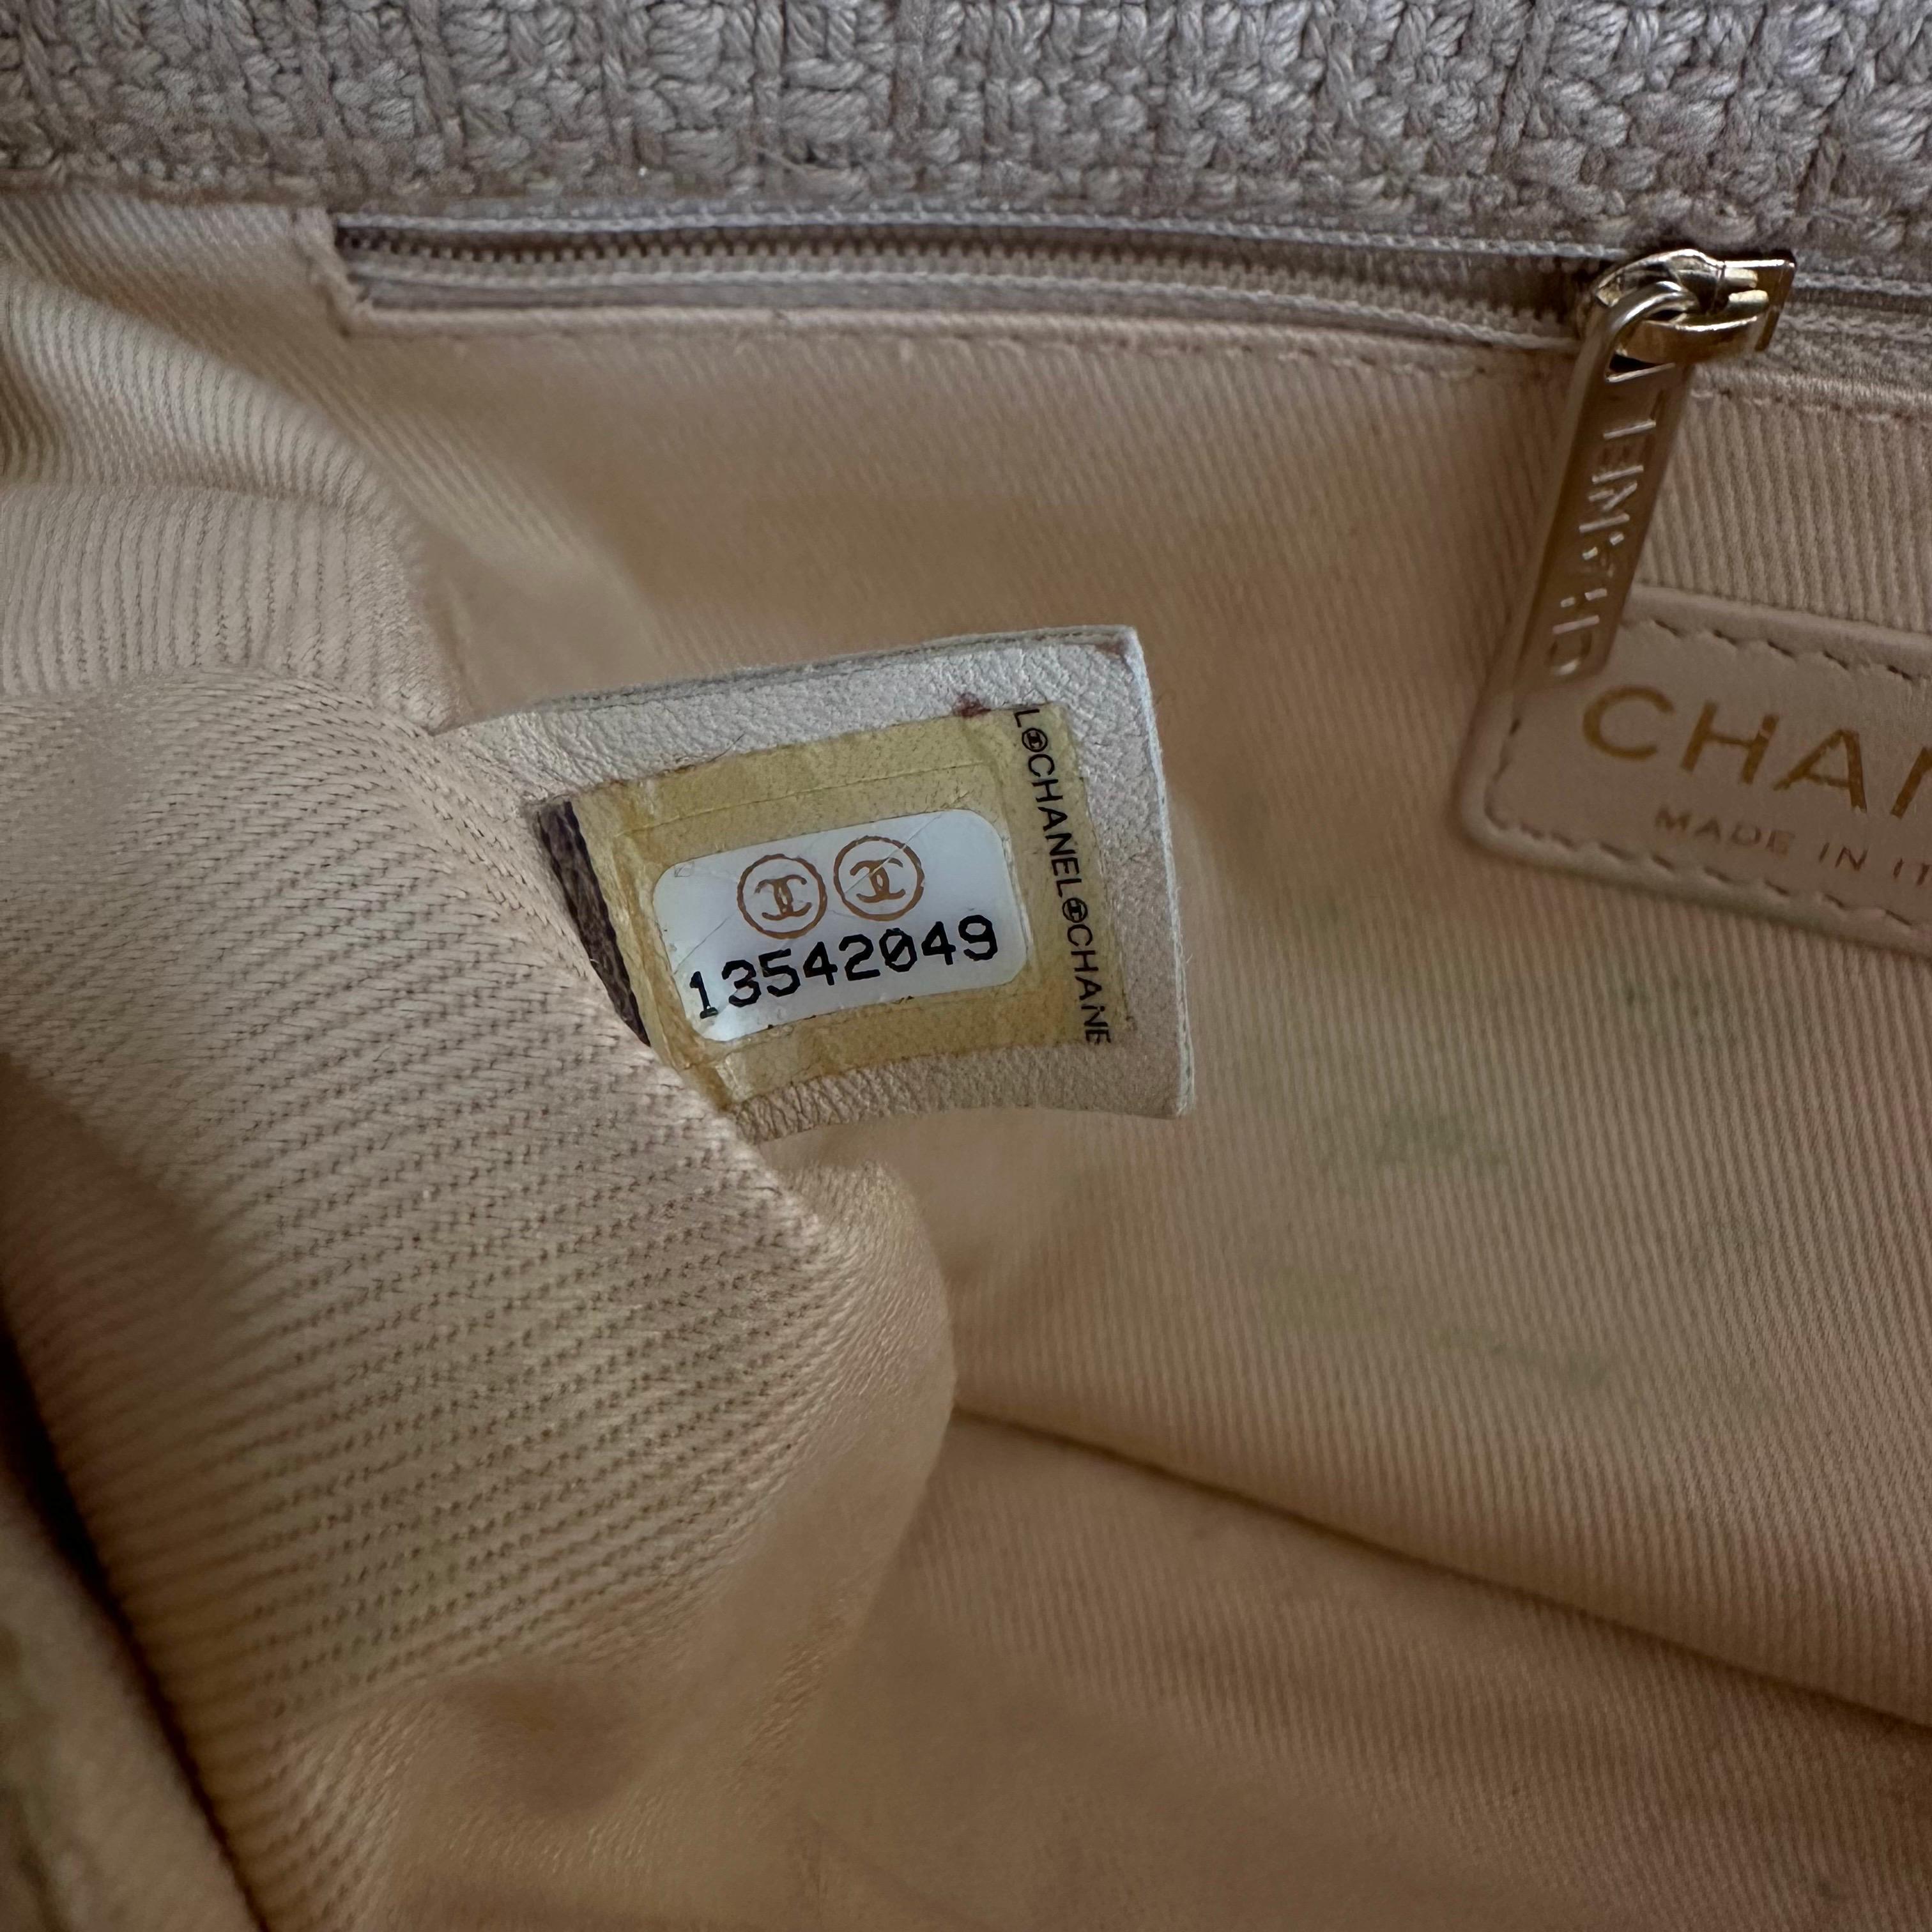 Chanel 2009 Small Sized Beige Tweed Fringe Organic Crochet Nature Flap Bag For Sale 15